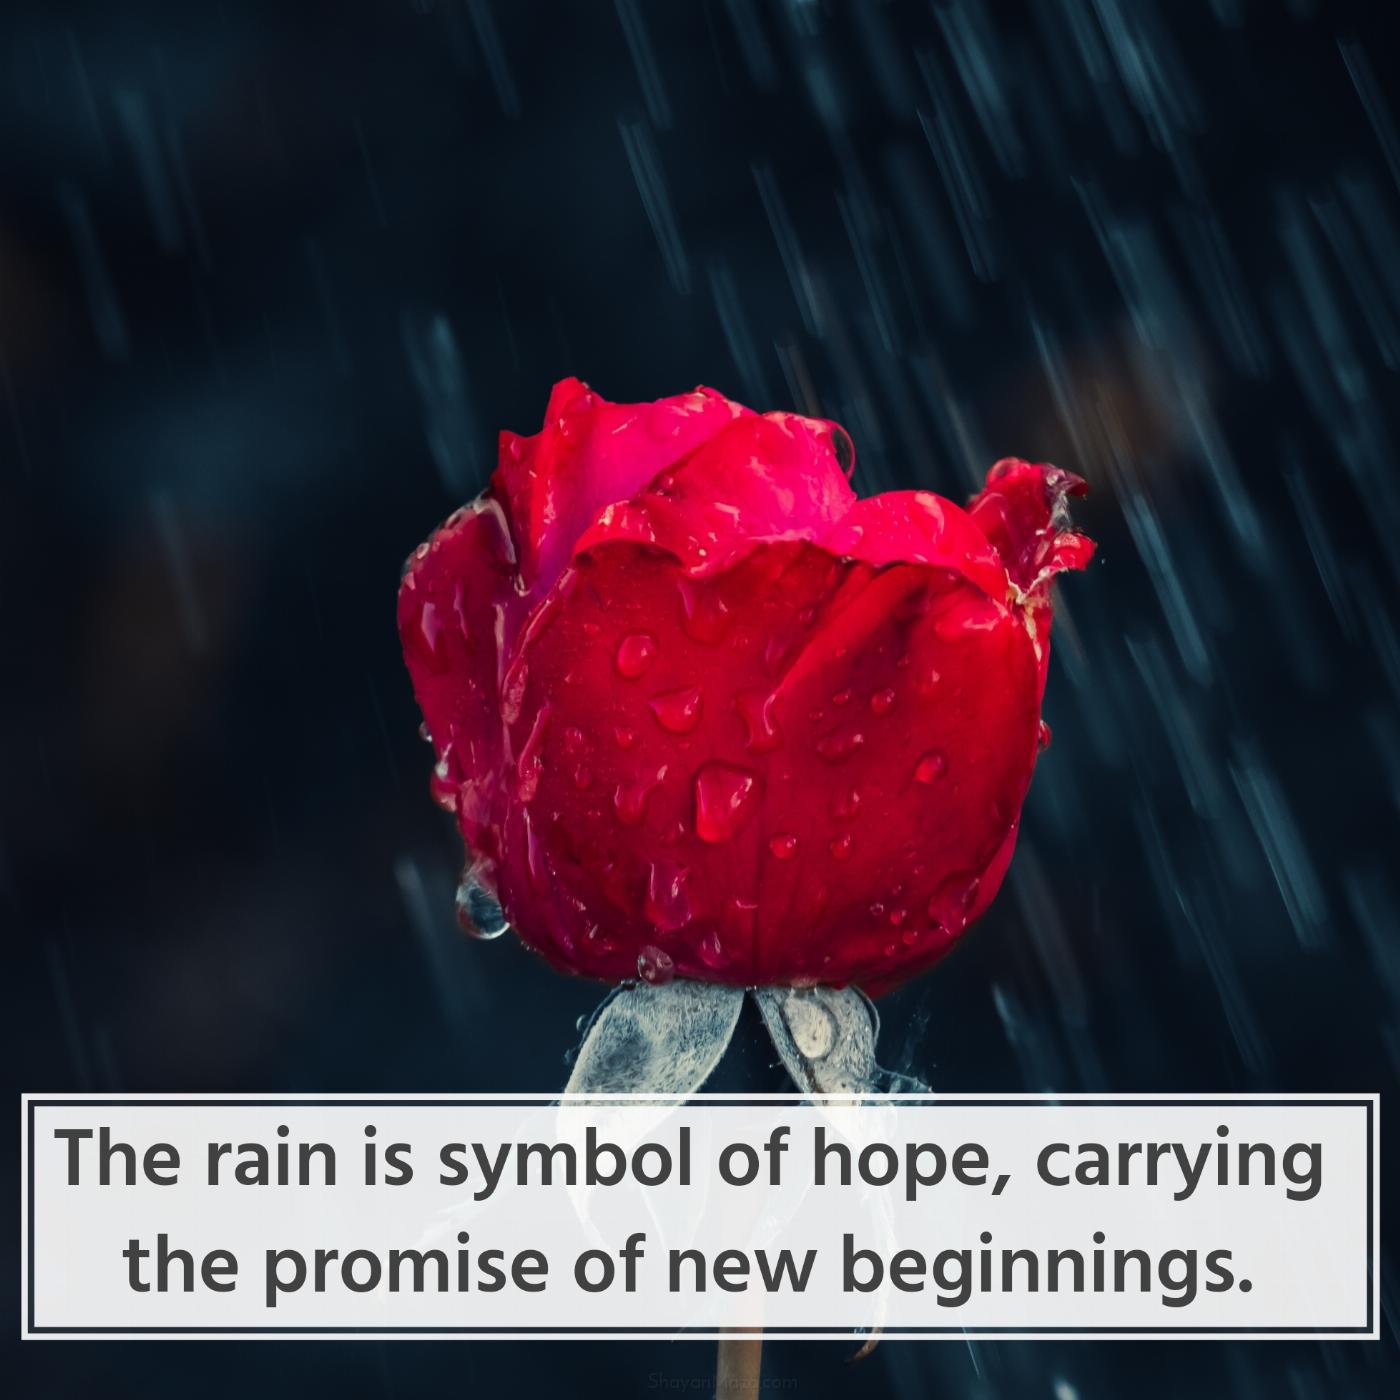 The rain is symbol of hope carrying the promise of new beginnings